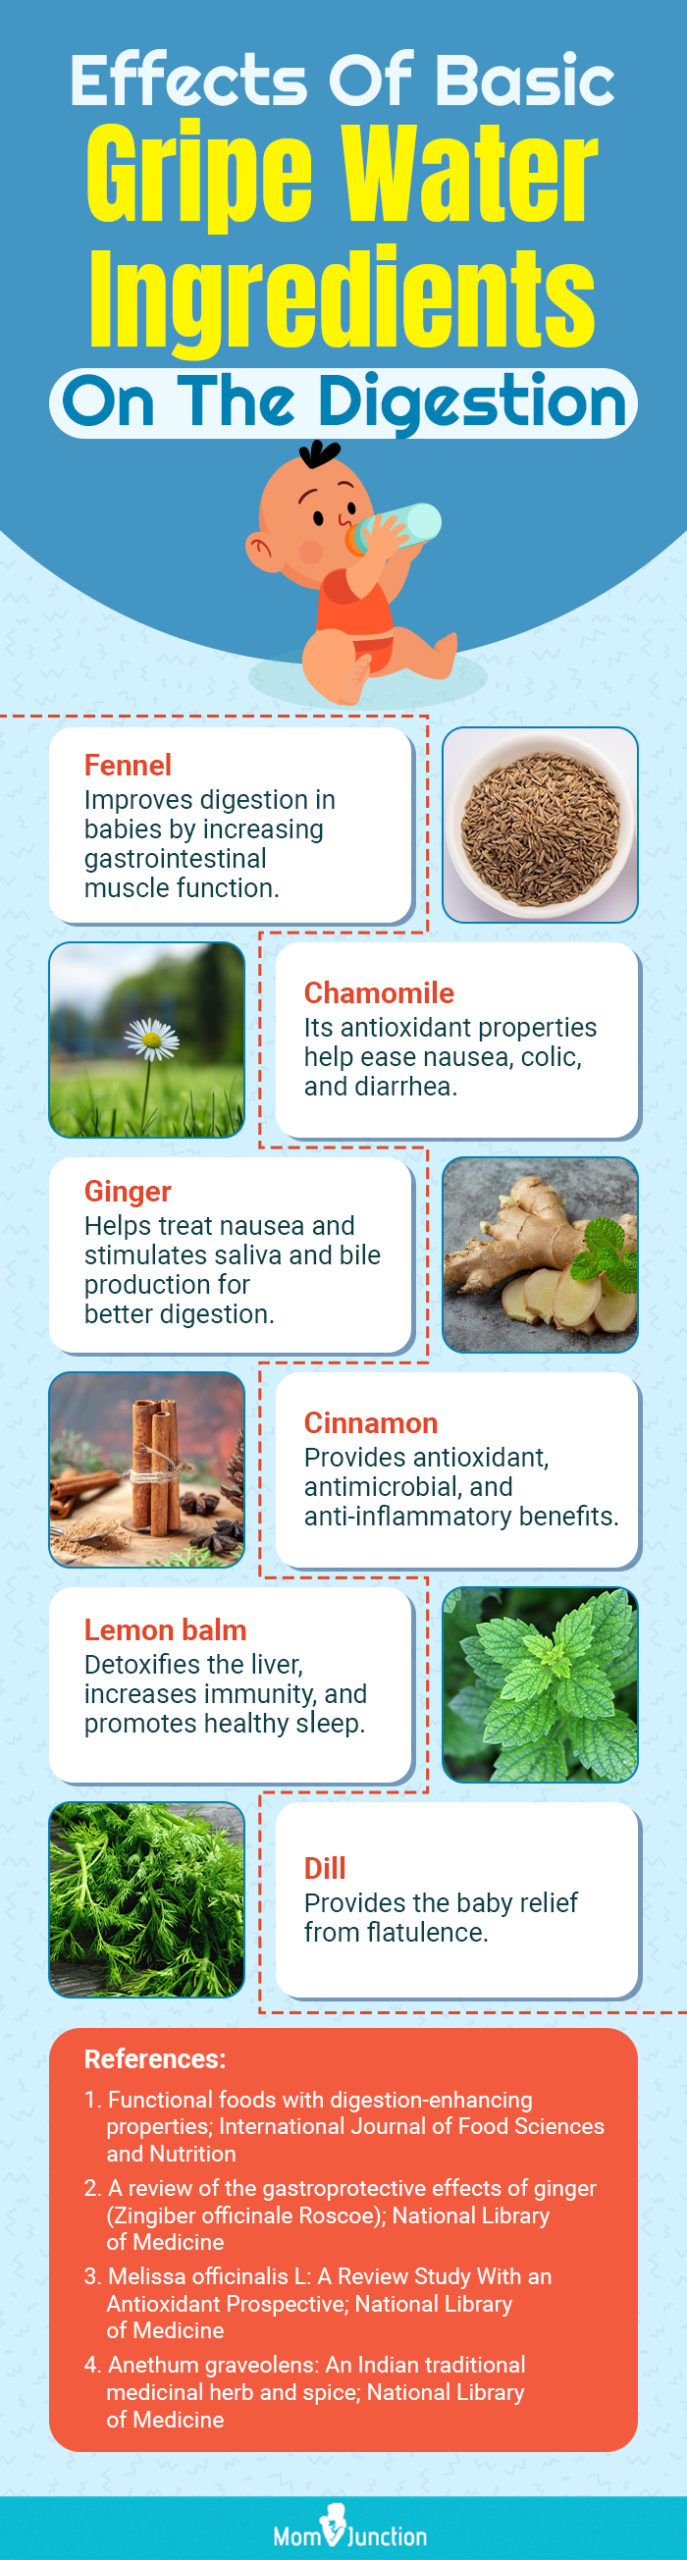 Effects Of Basic Gripe Water Ingredients On The Digestion (infographic)